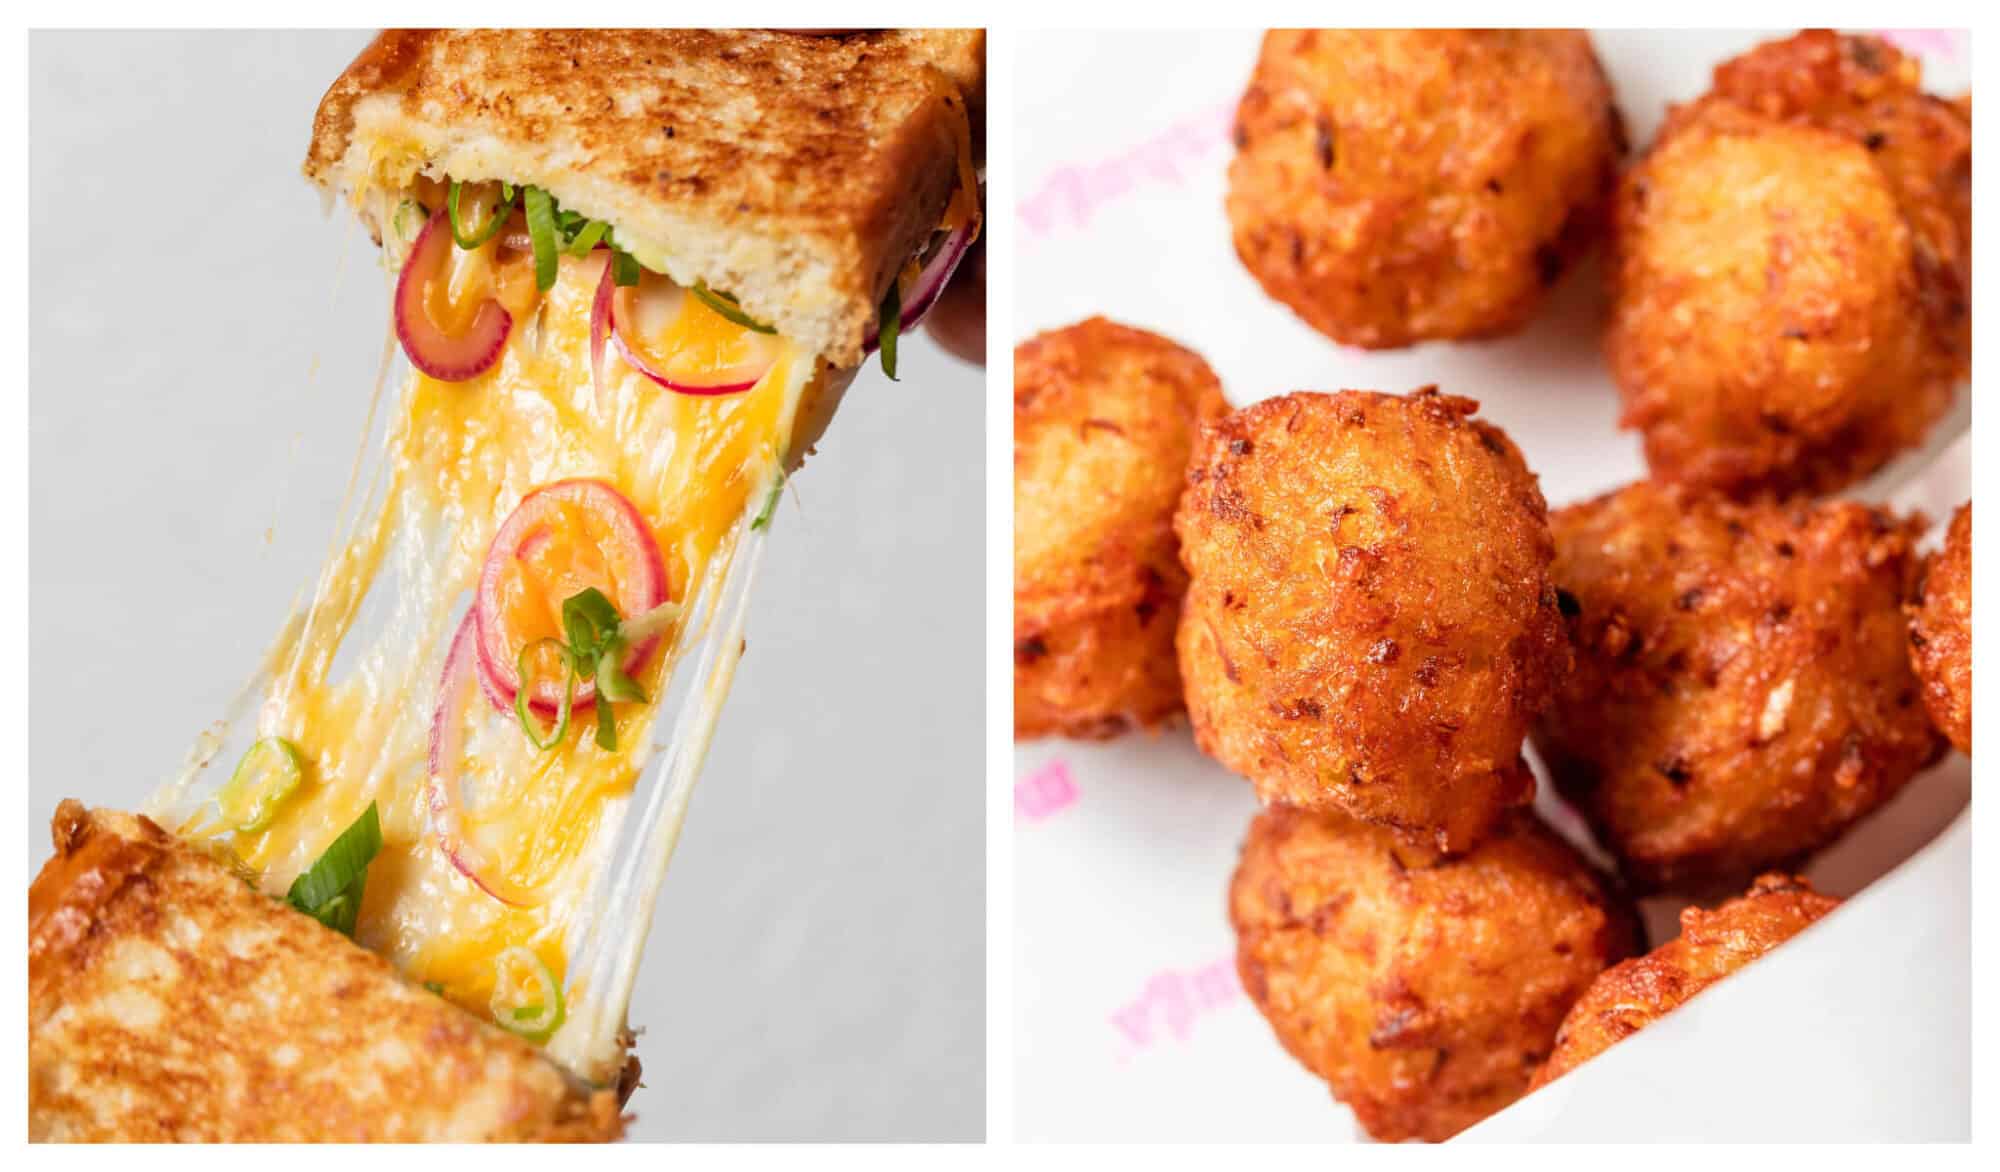 Left: a sandwich cut and pulled in half with melted cheese, radish and herbs from the Paris restaurant Meshuga. Right: fried brown balls of cheese sitting in a white paper wrap from the same Parisian restaurant